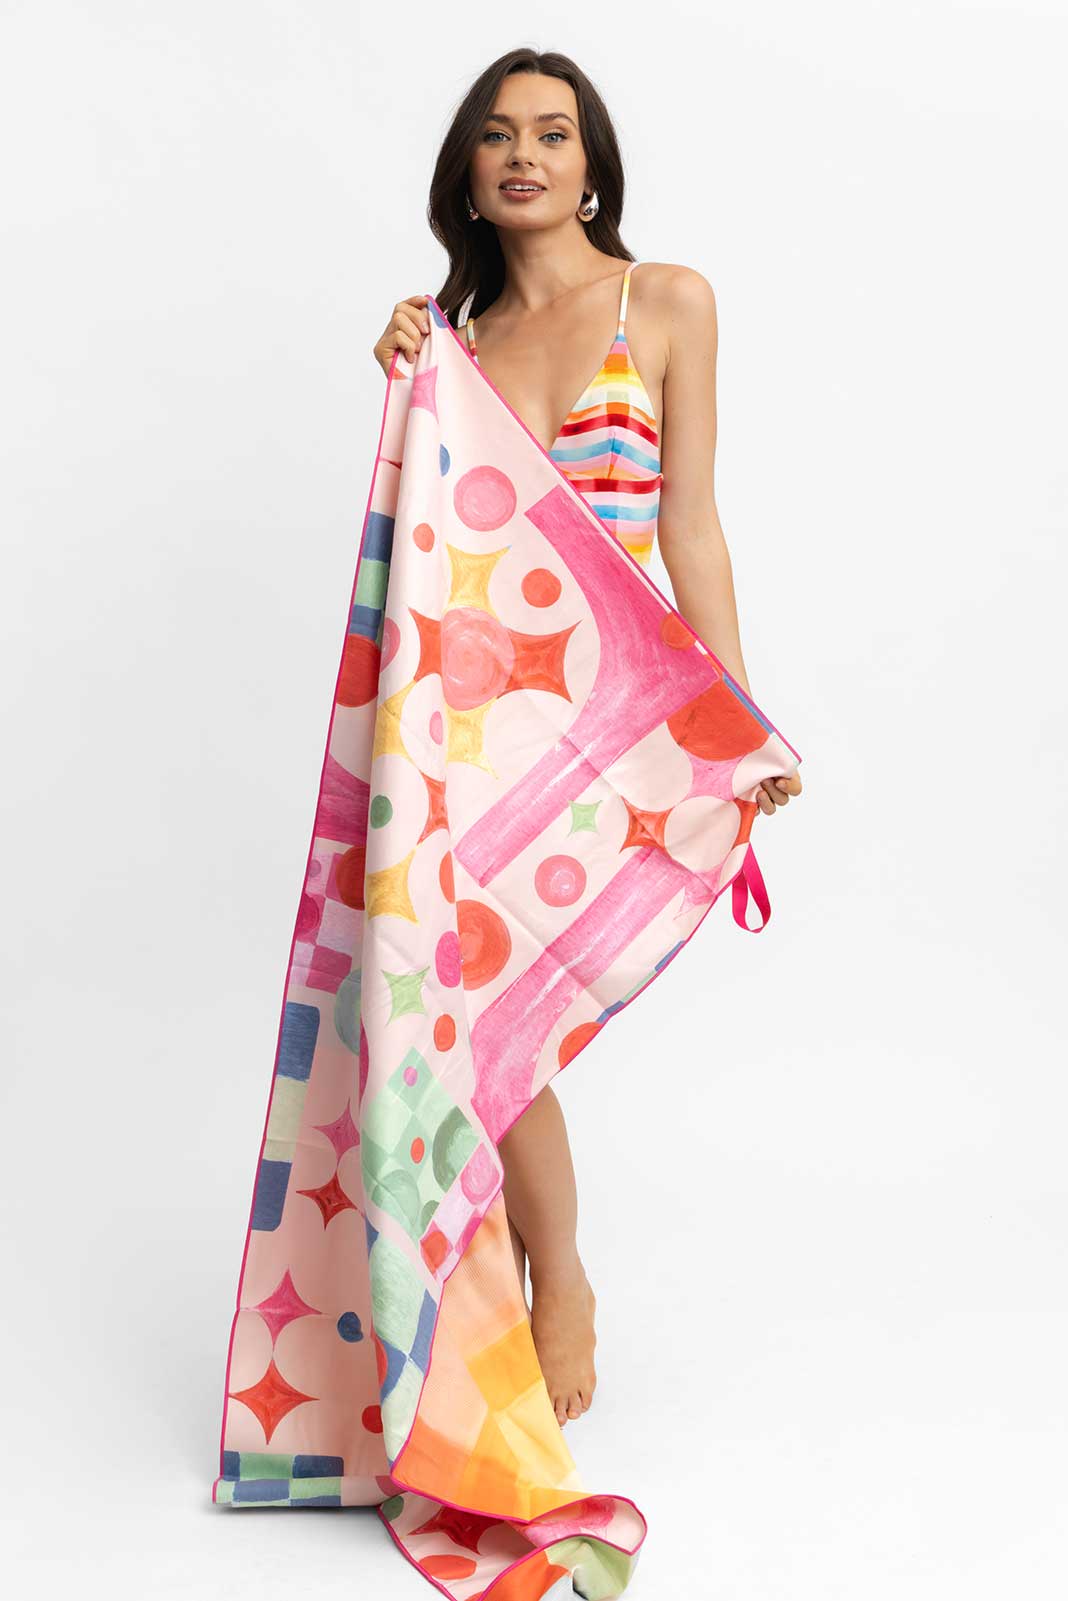 Packable Beach Towel / Day Trippin'